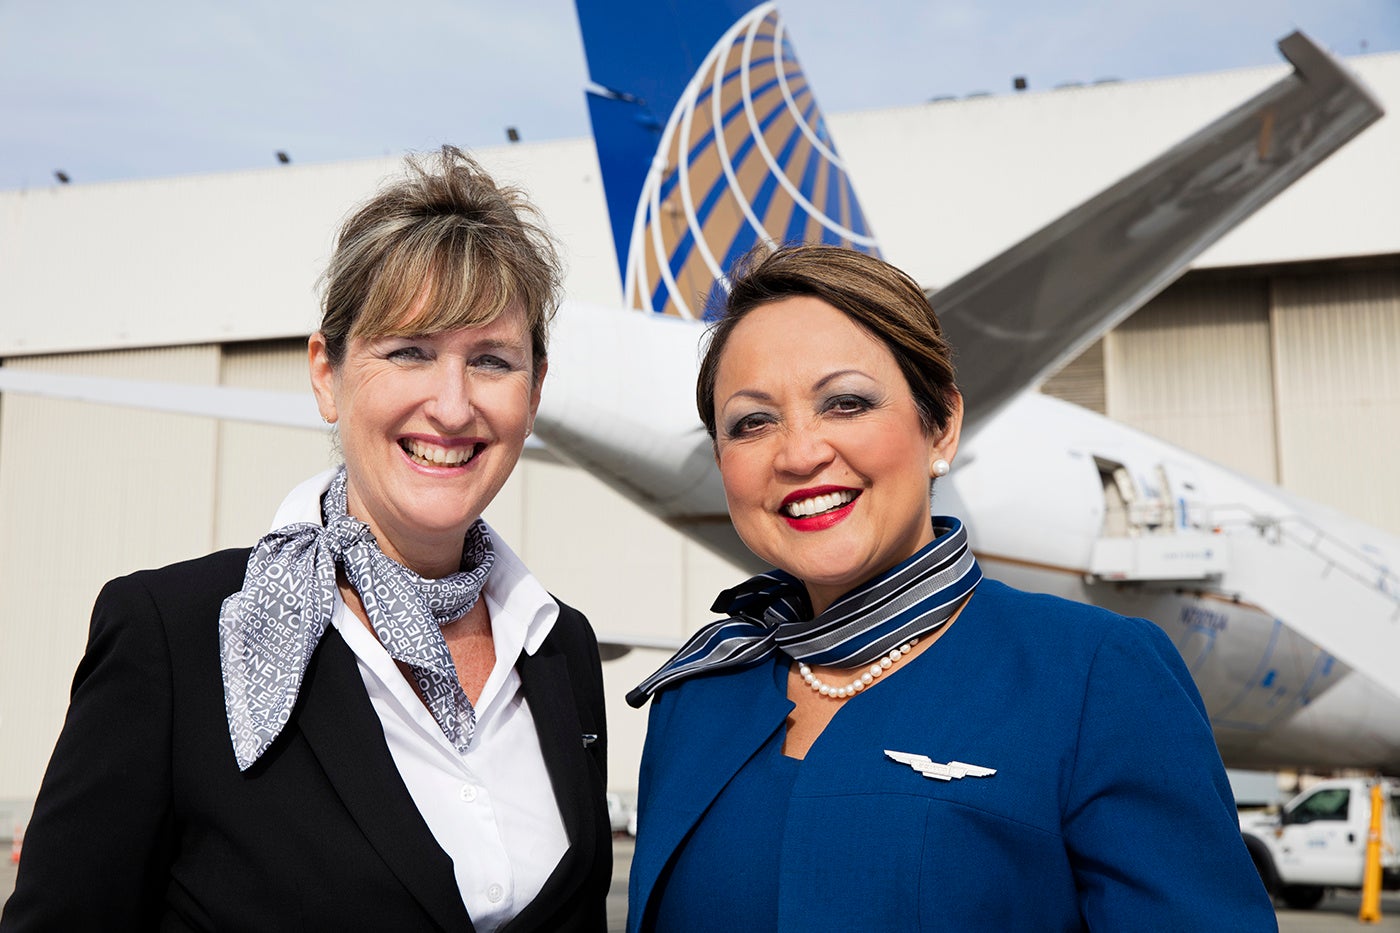 <p>United Airlines is updating its appearance standards so staff can feel comfortable at work and express themselves</p>